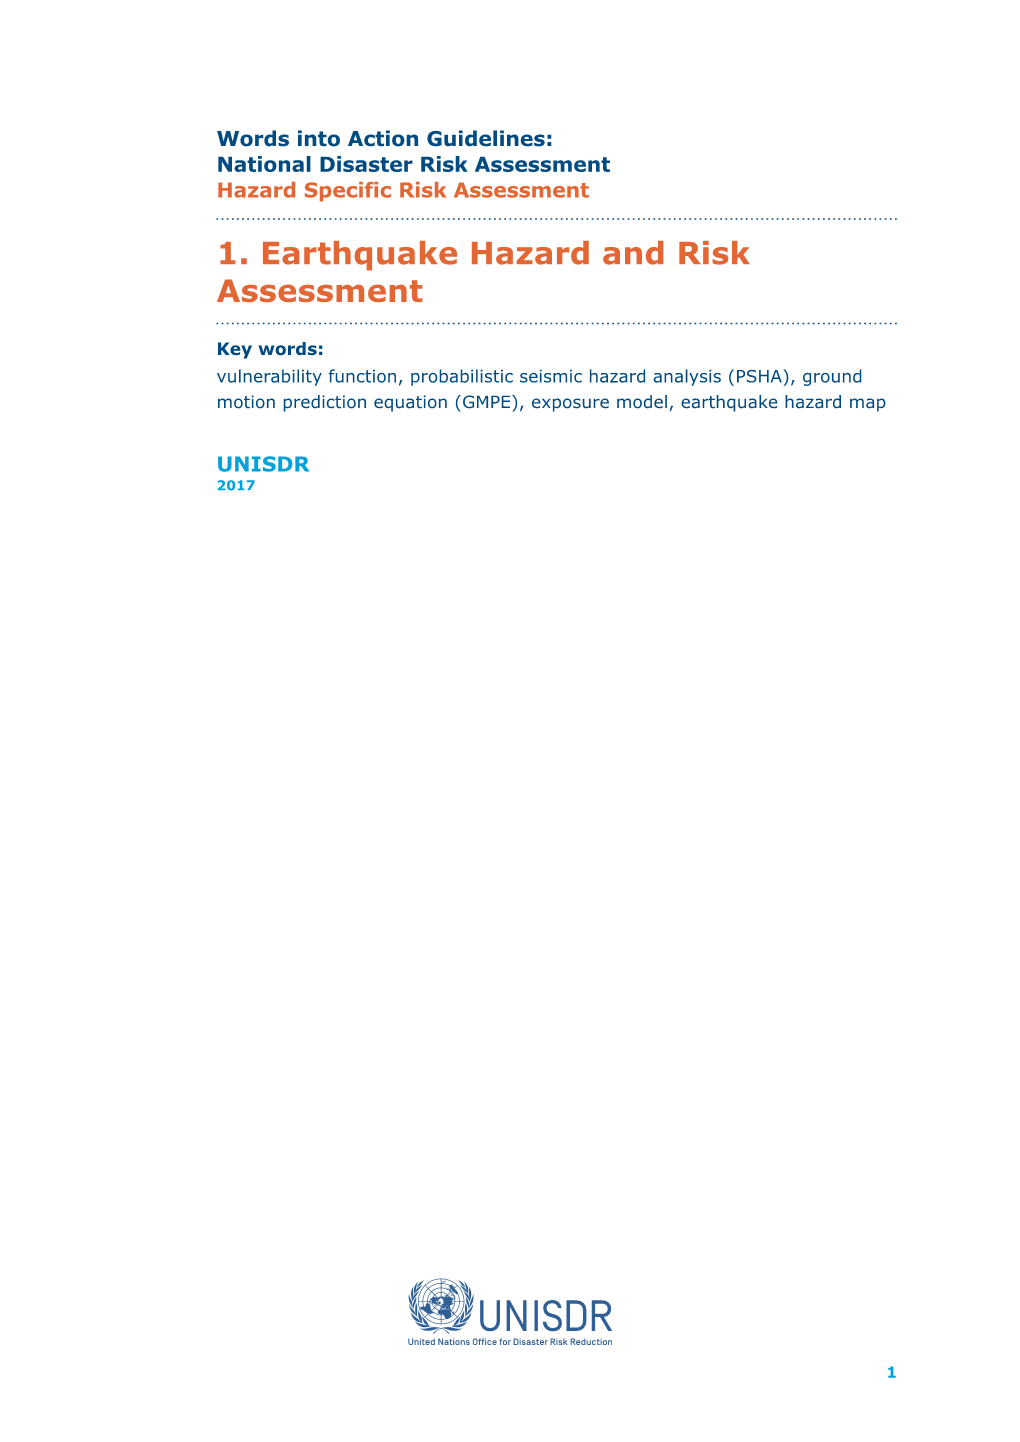 1. Earthquake Hazard and Risk Assessment